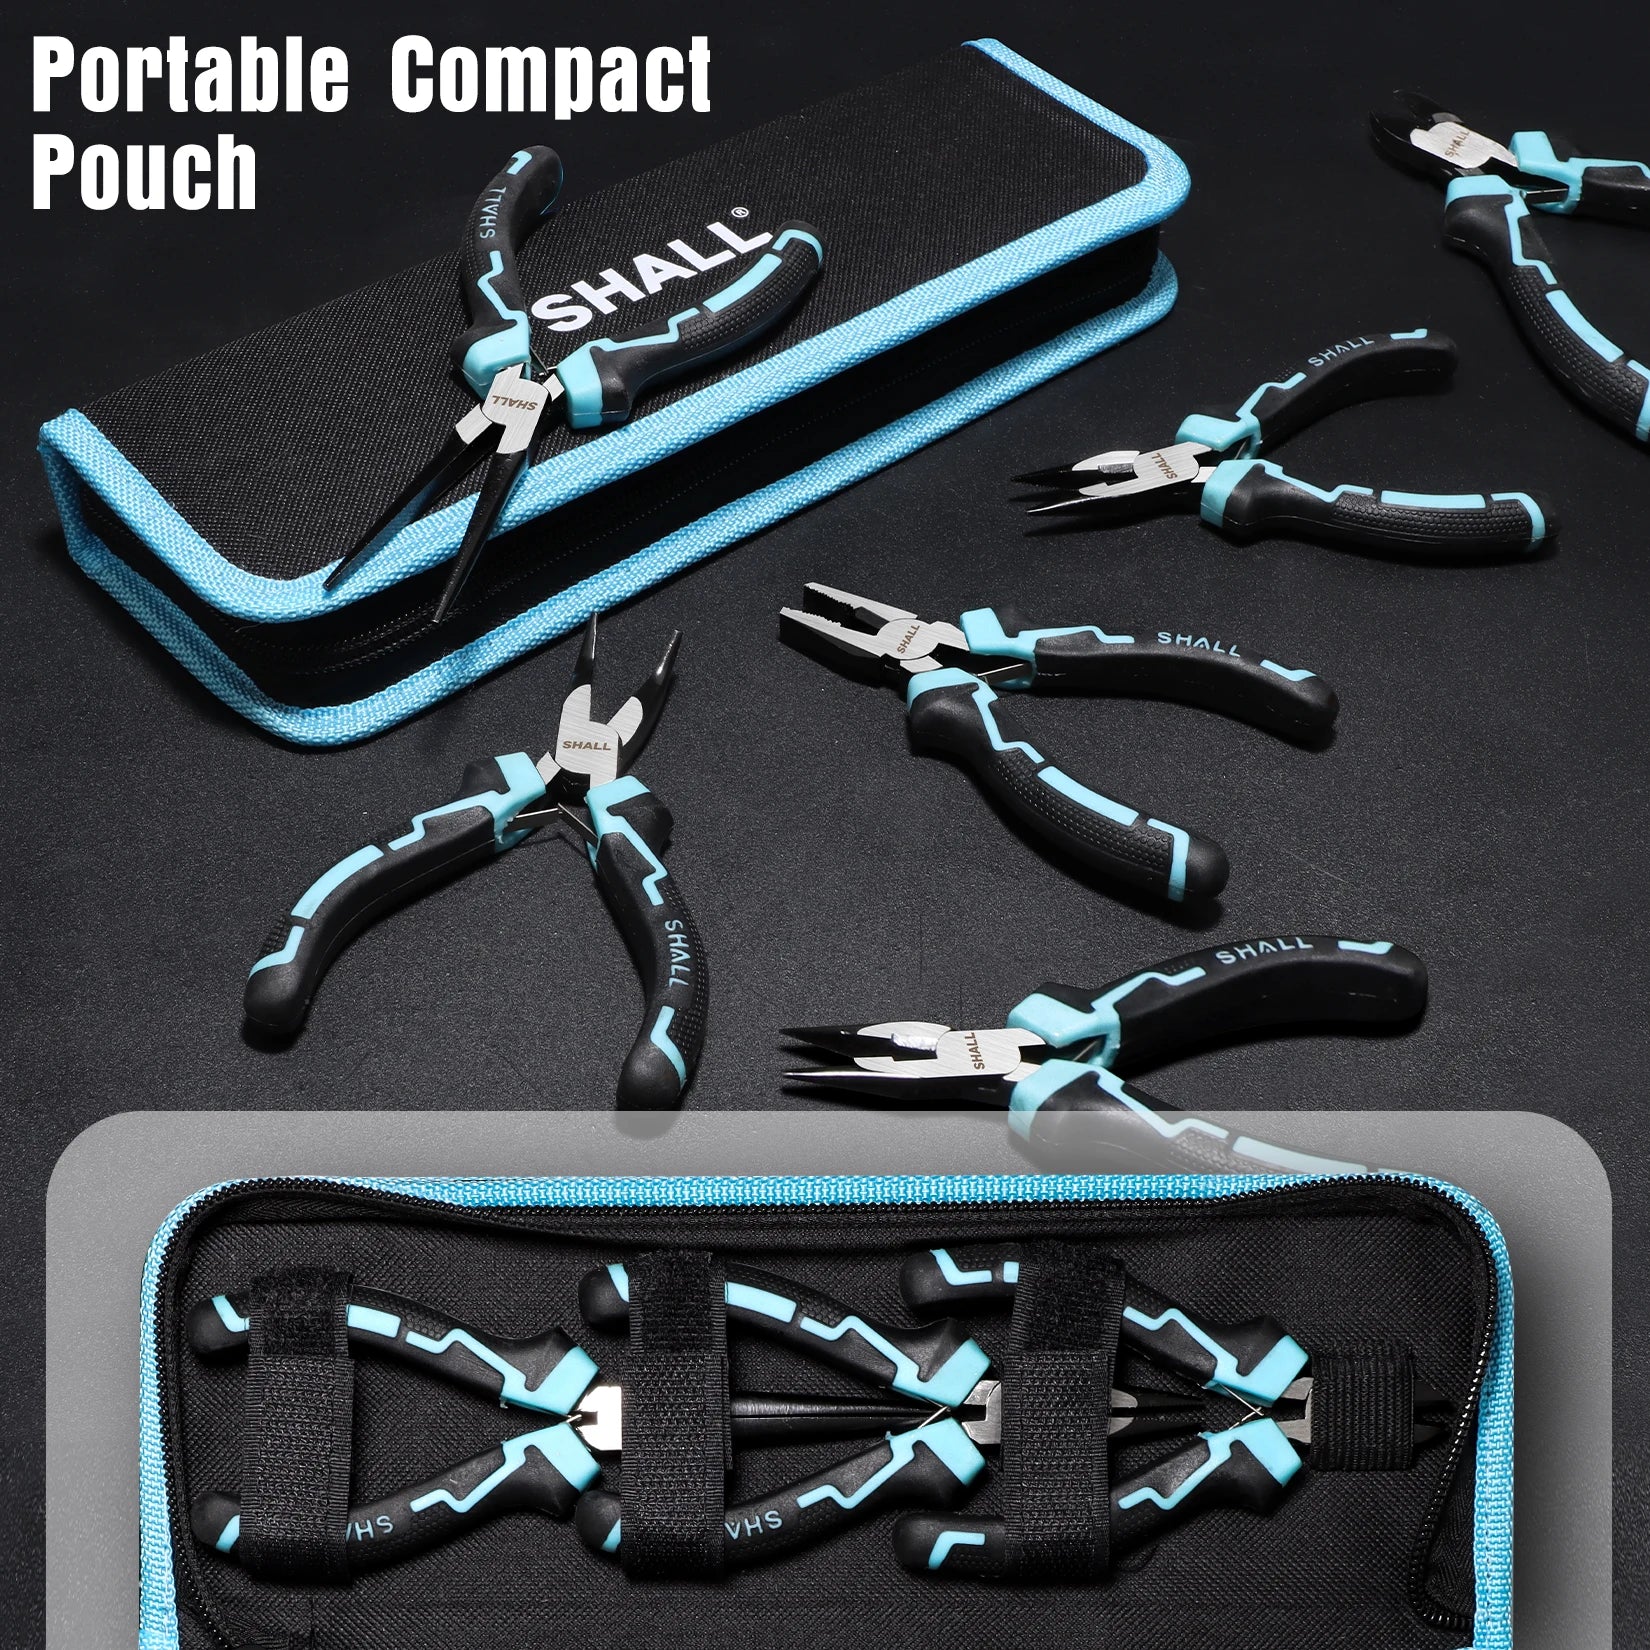 SHALL Mini Pliers Set 6-Piece Small Pliers Tool Set for Making Crafts Electronic Repairing & Jewelry with Pouch